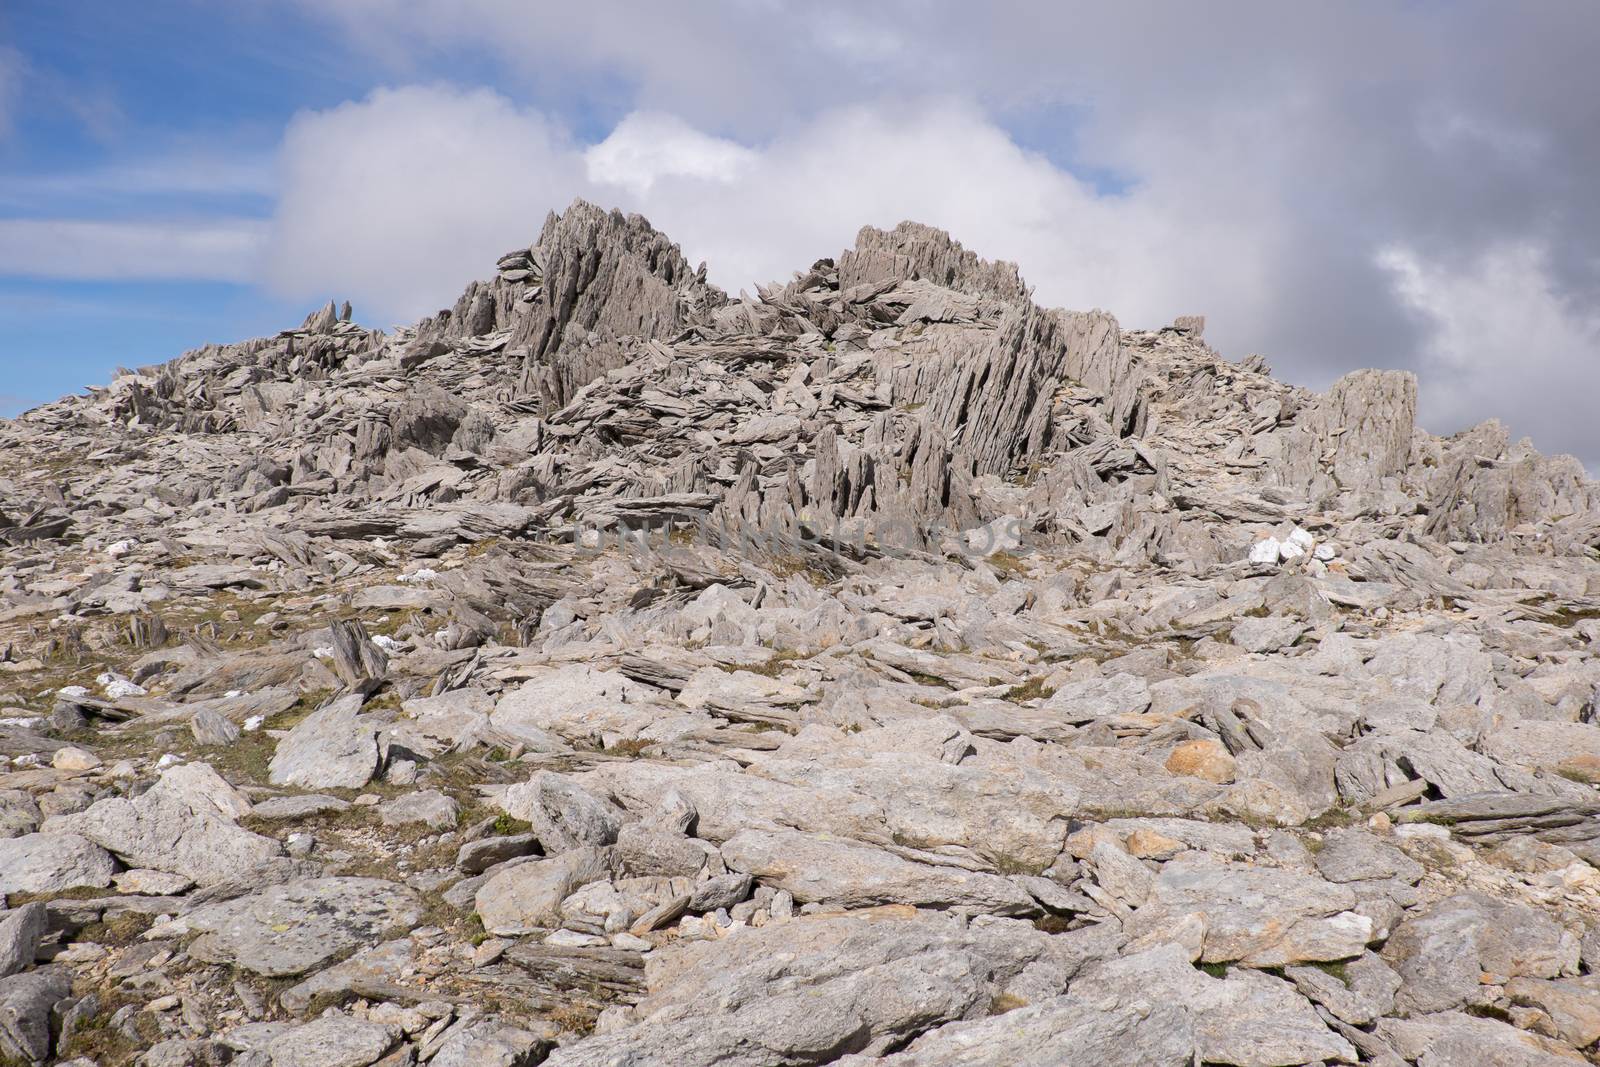 The broken rock features on the summit of Glyder Fawr, Snowdonia, Wales, UK.